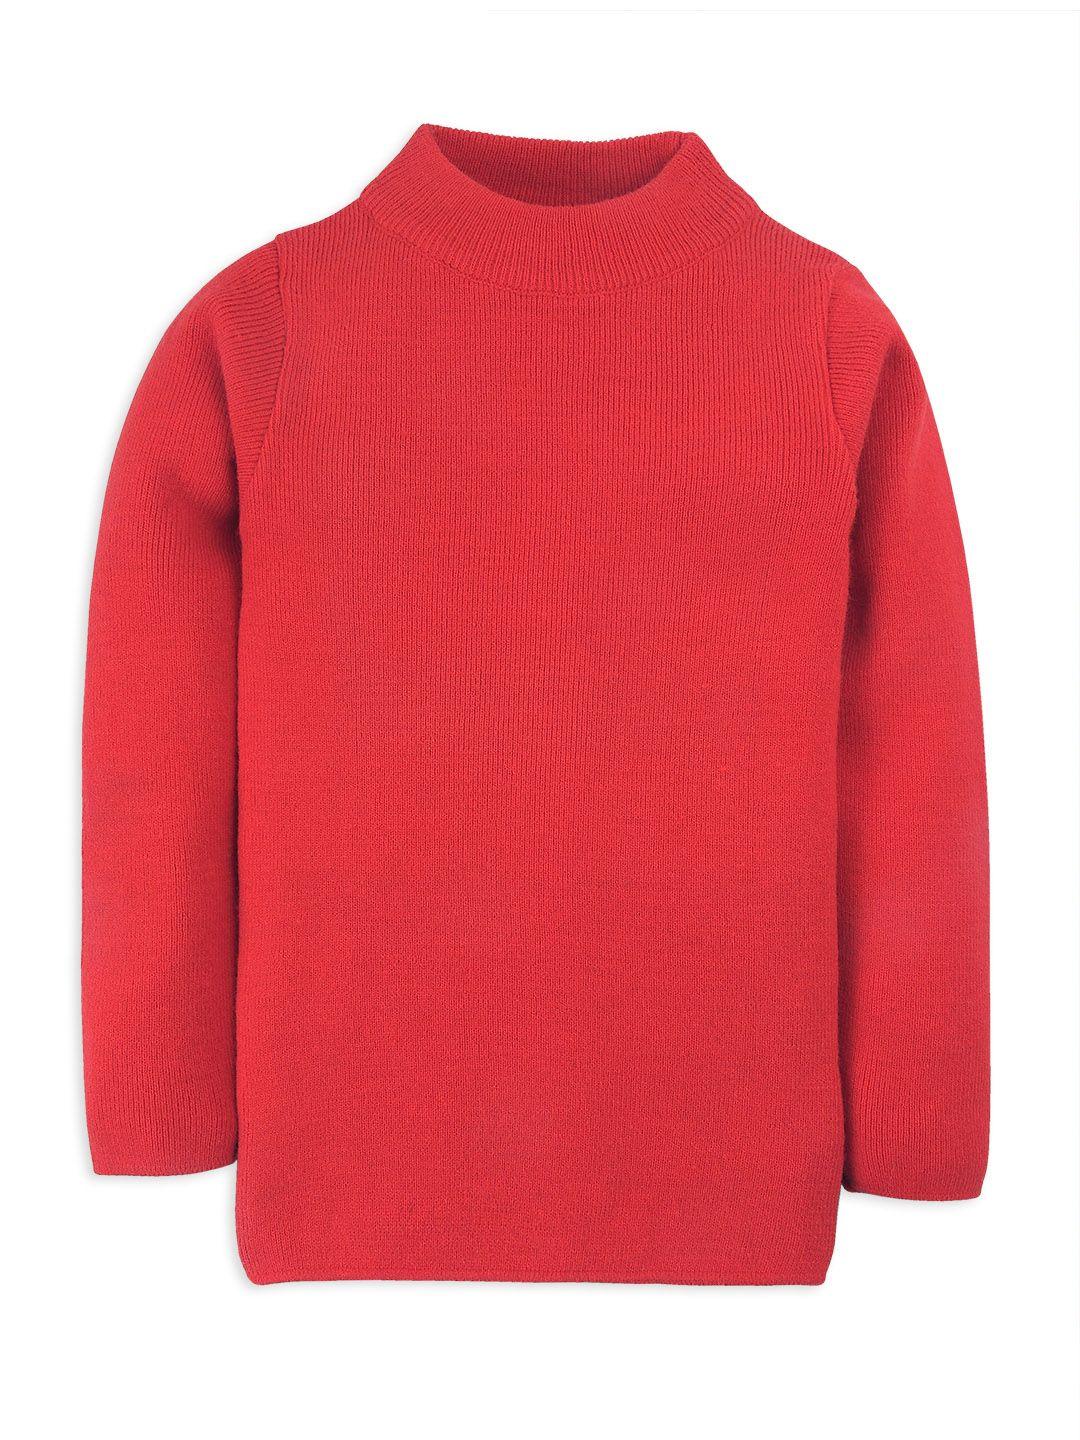 rvk kids red solid sweater